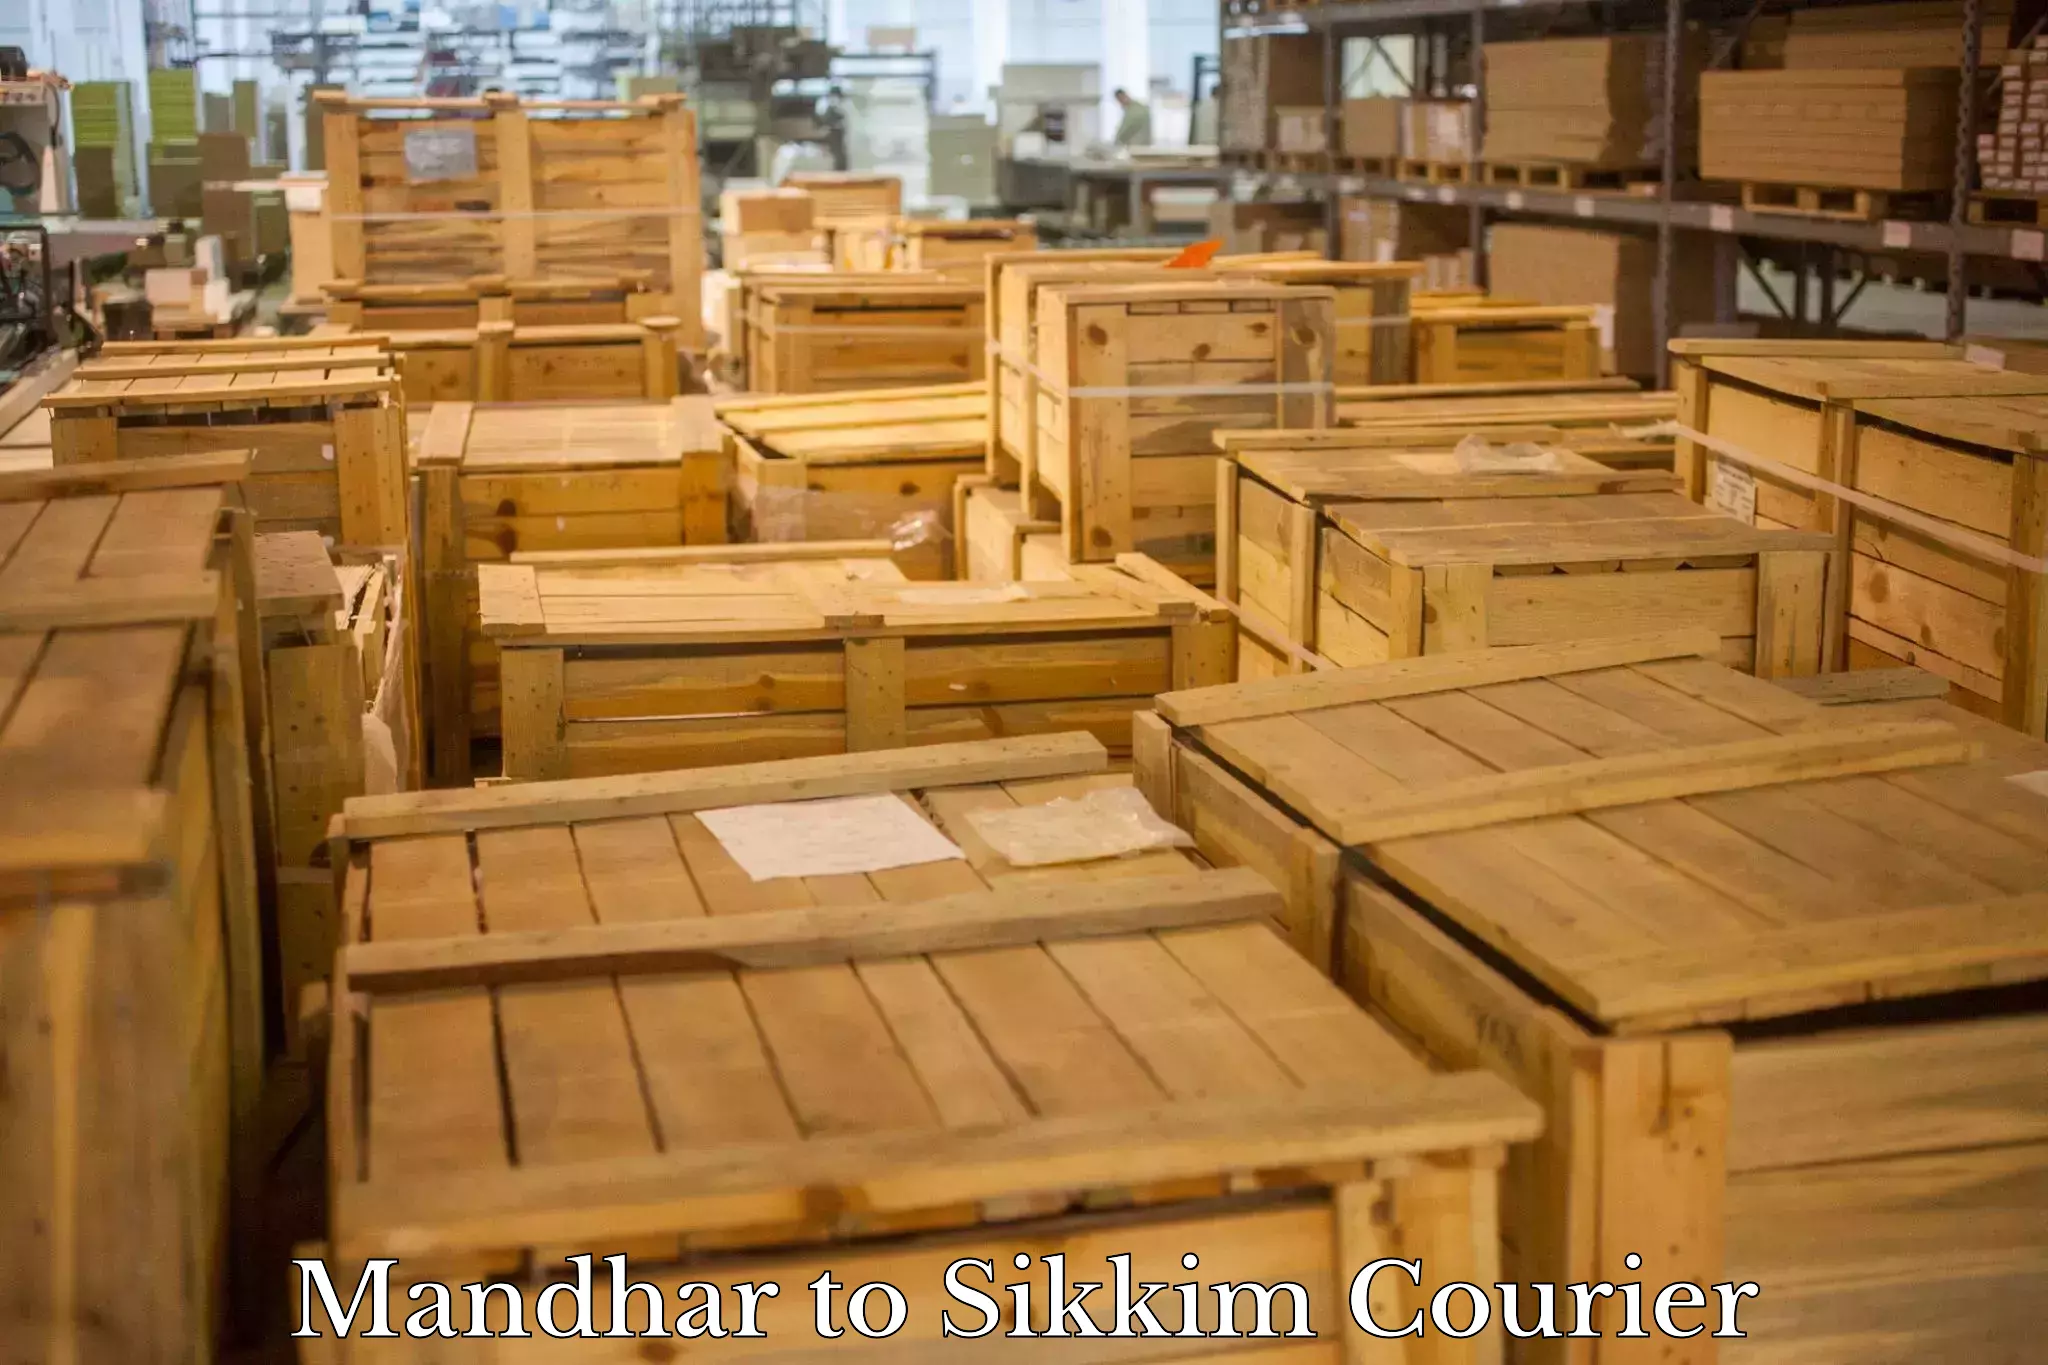 Express delivery capabilities Mandhar to Sikkim